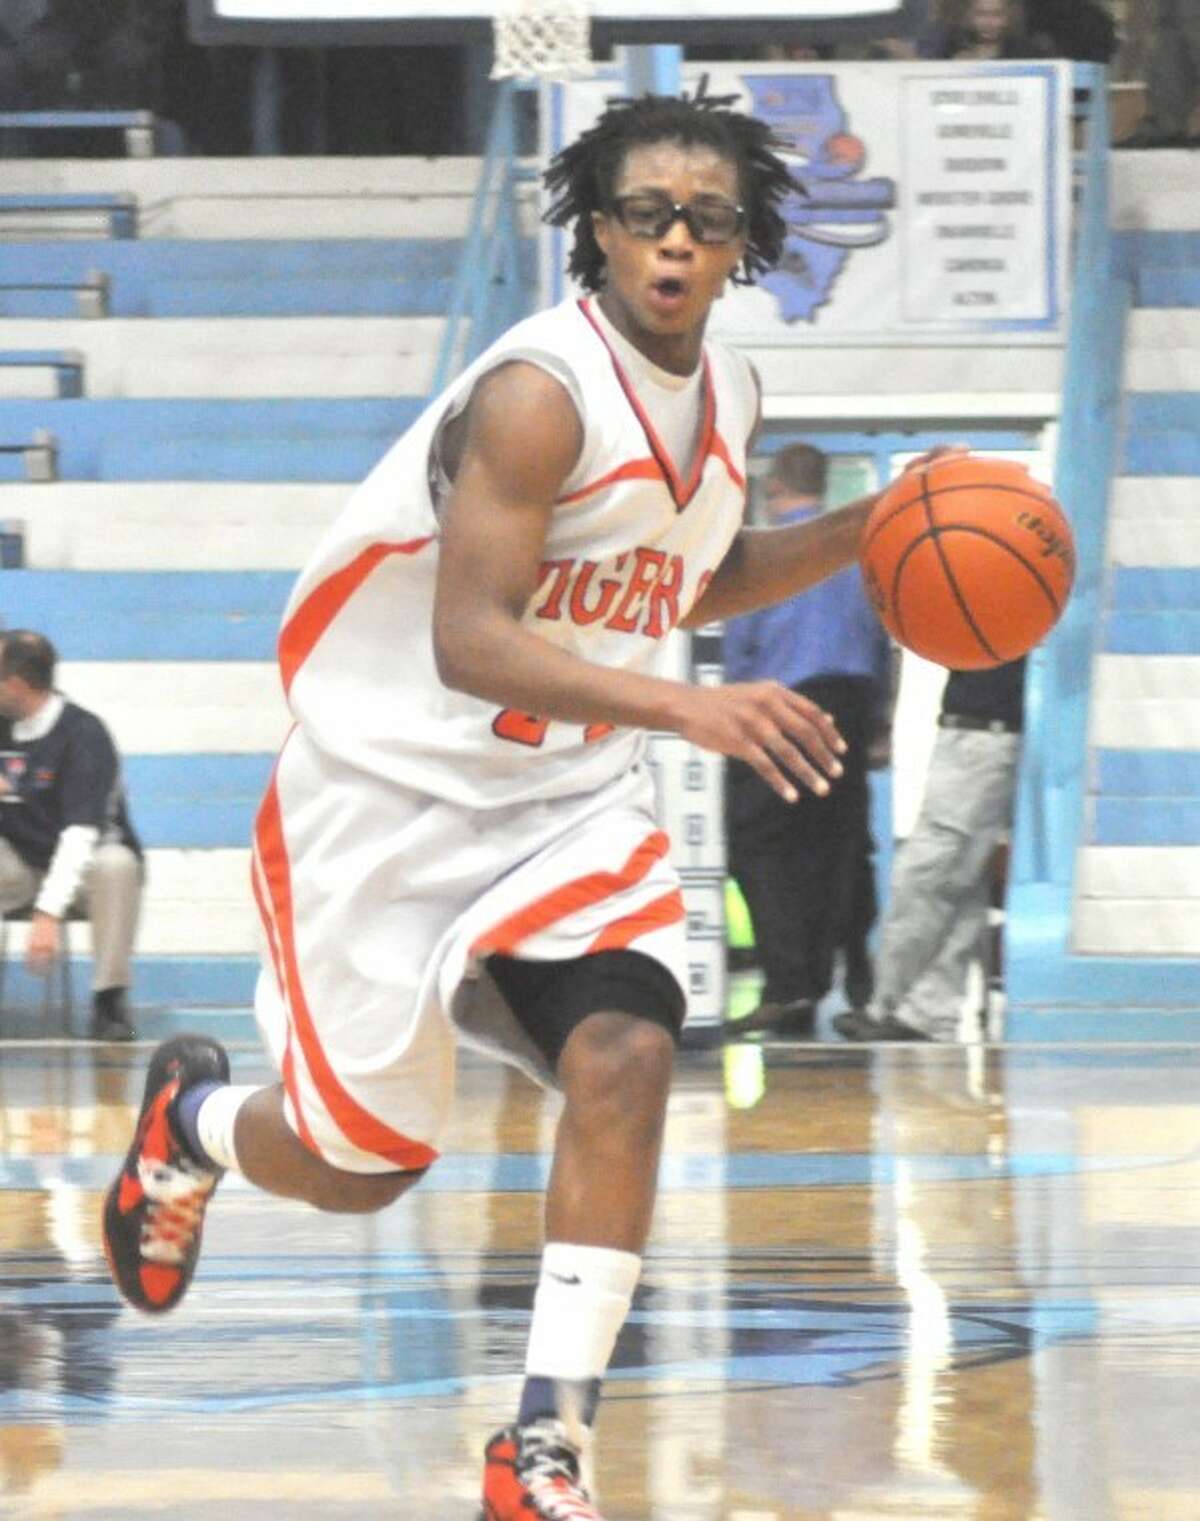 Tiger point guard Shawn Roundtree brings the ball up court Saturday in Pinckneyville against Webster Groves.